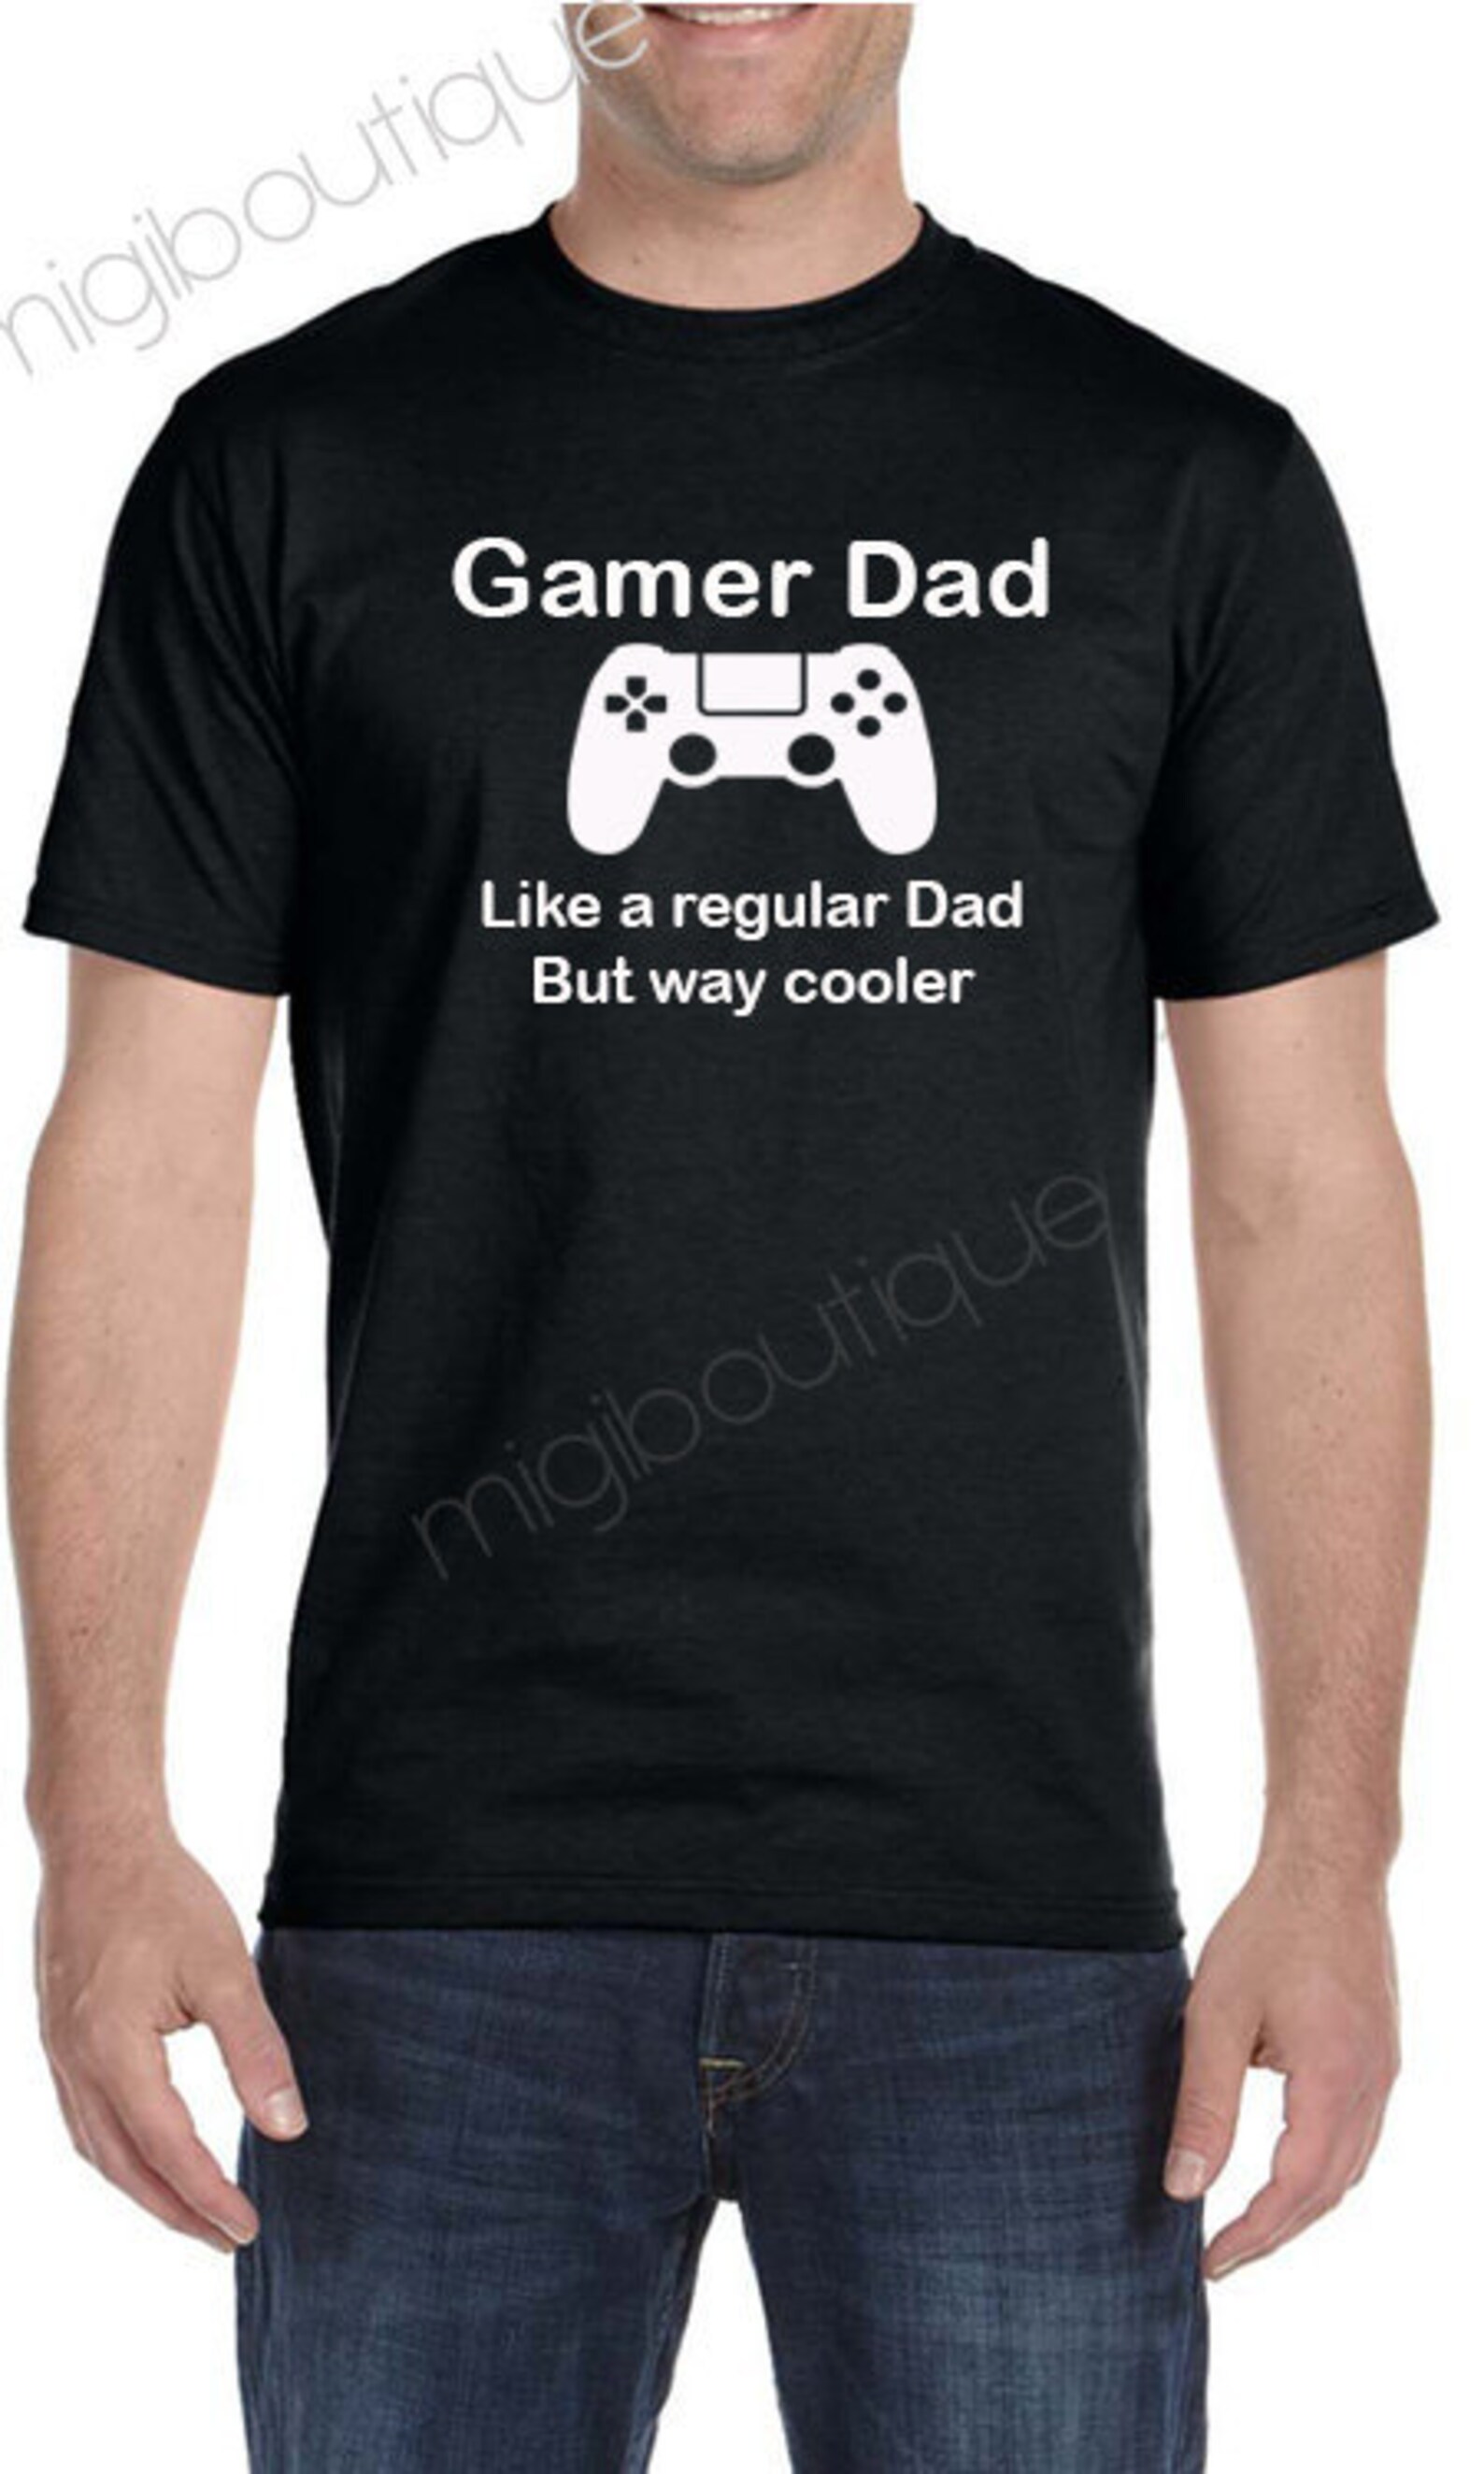 Gamer Dad t-shirt pick size and color daddy father gift | Etsy